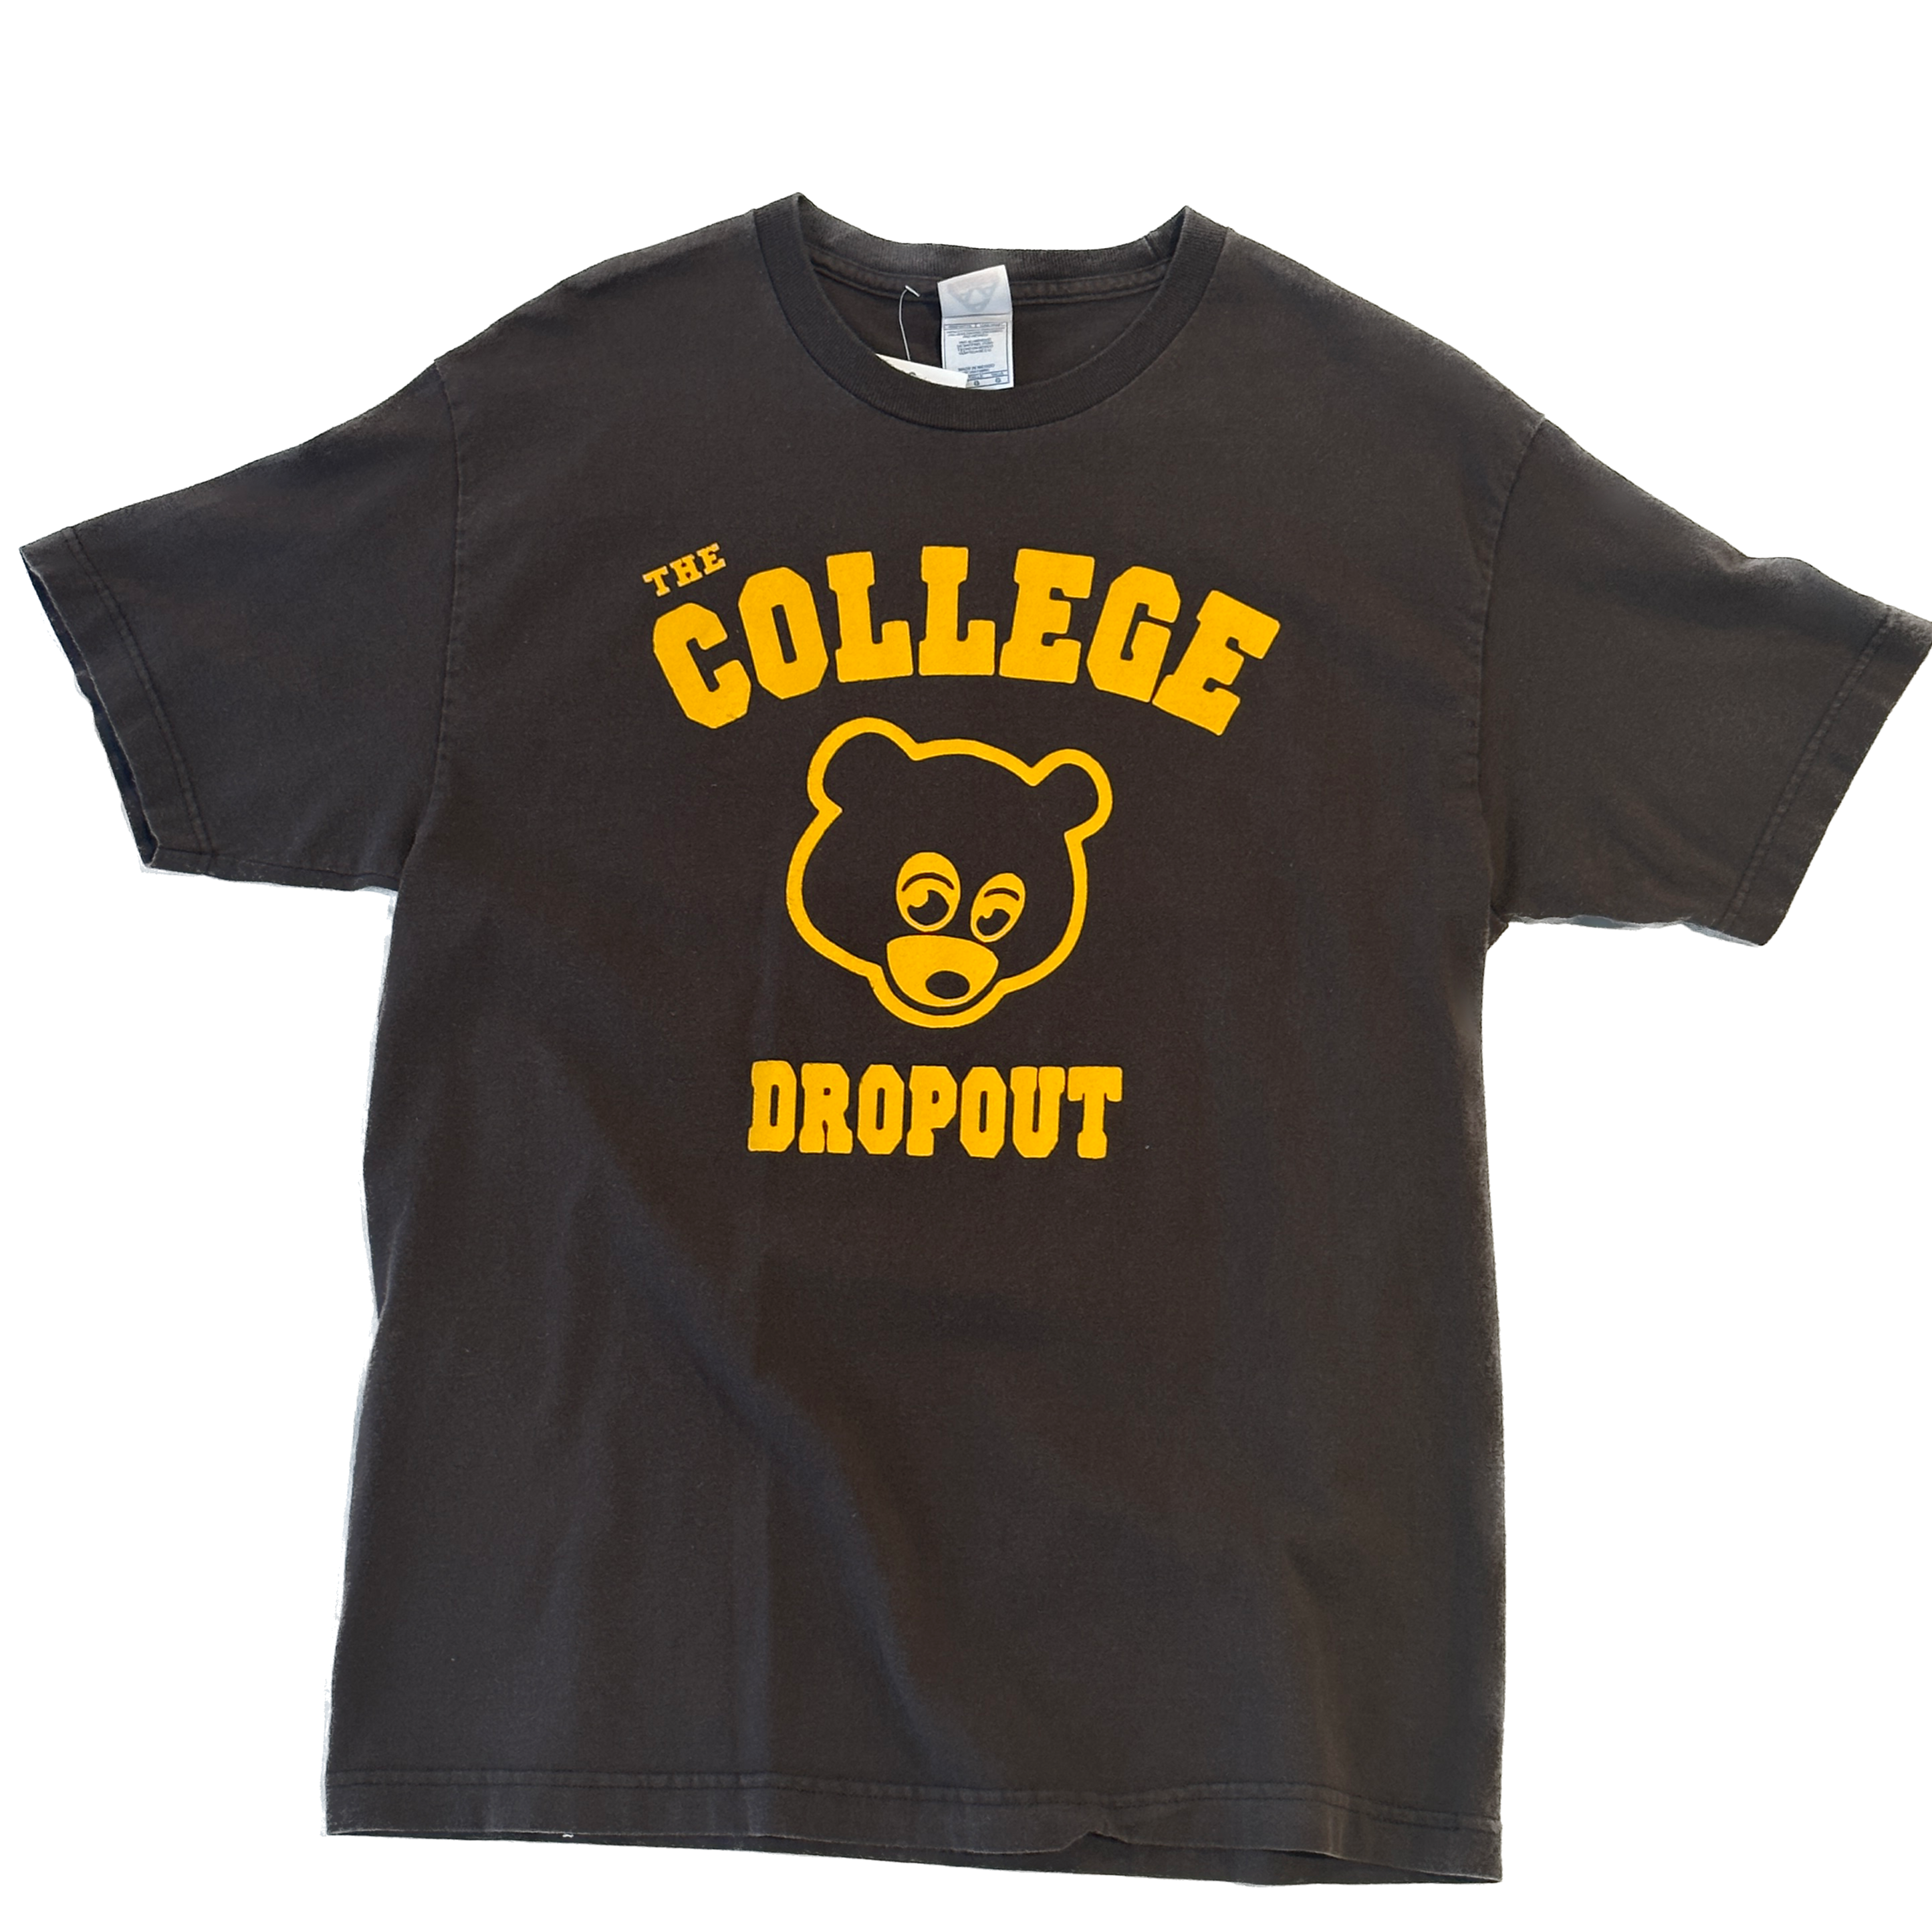 College Drop Out Brown Tee size Large